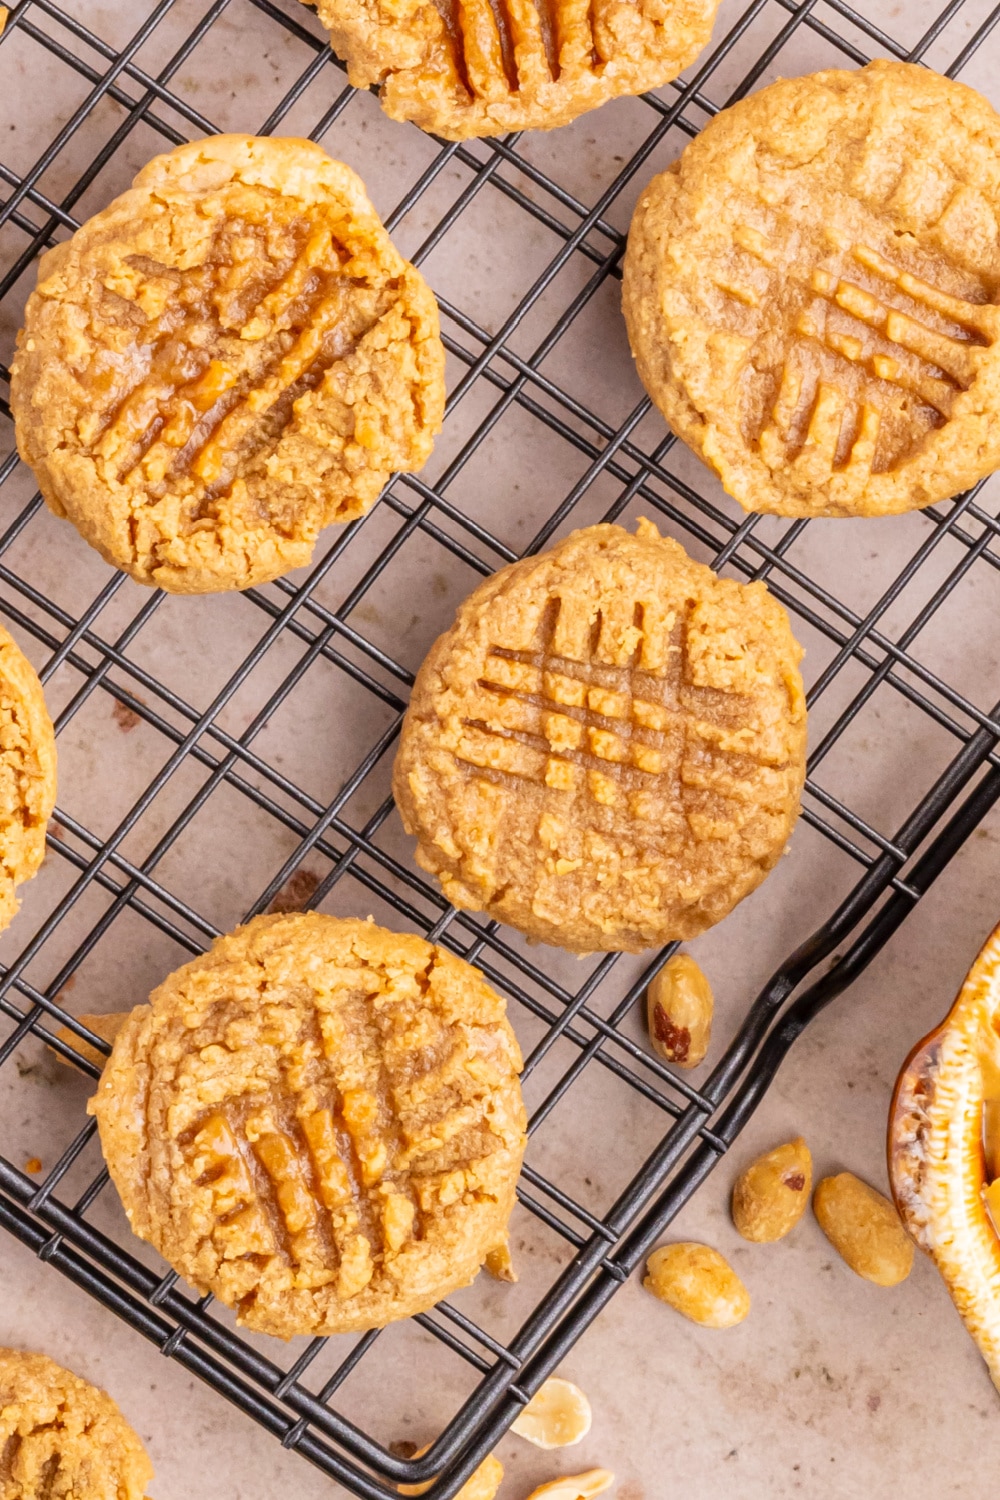 Peanut Butter Cookies fresh from the oven cooling on a rack.